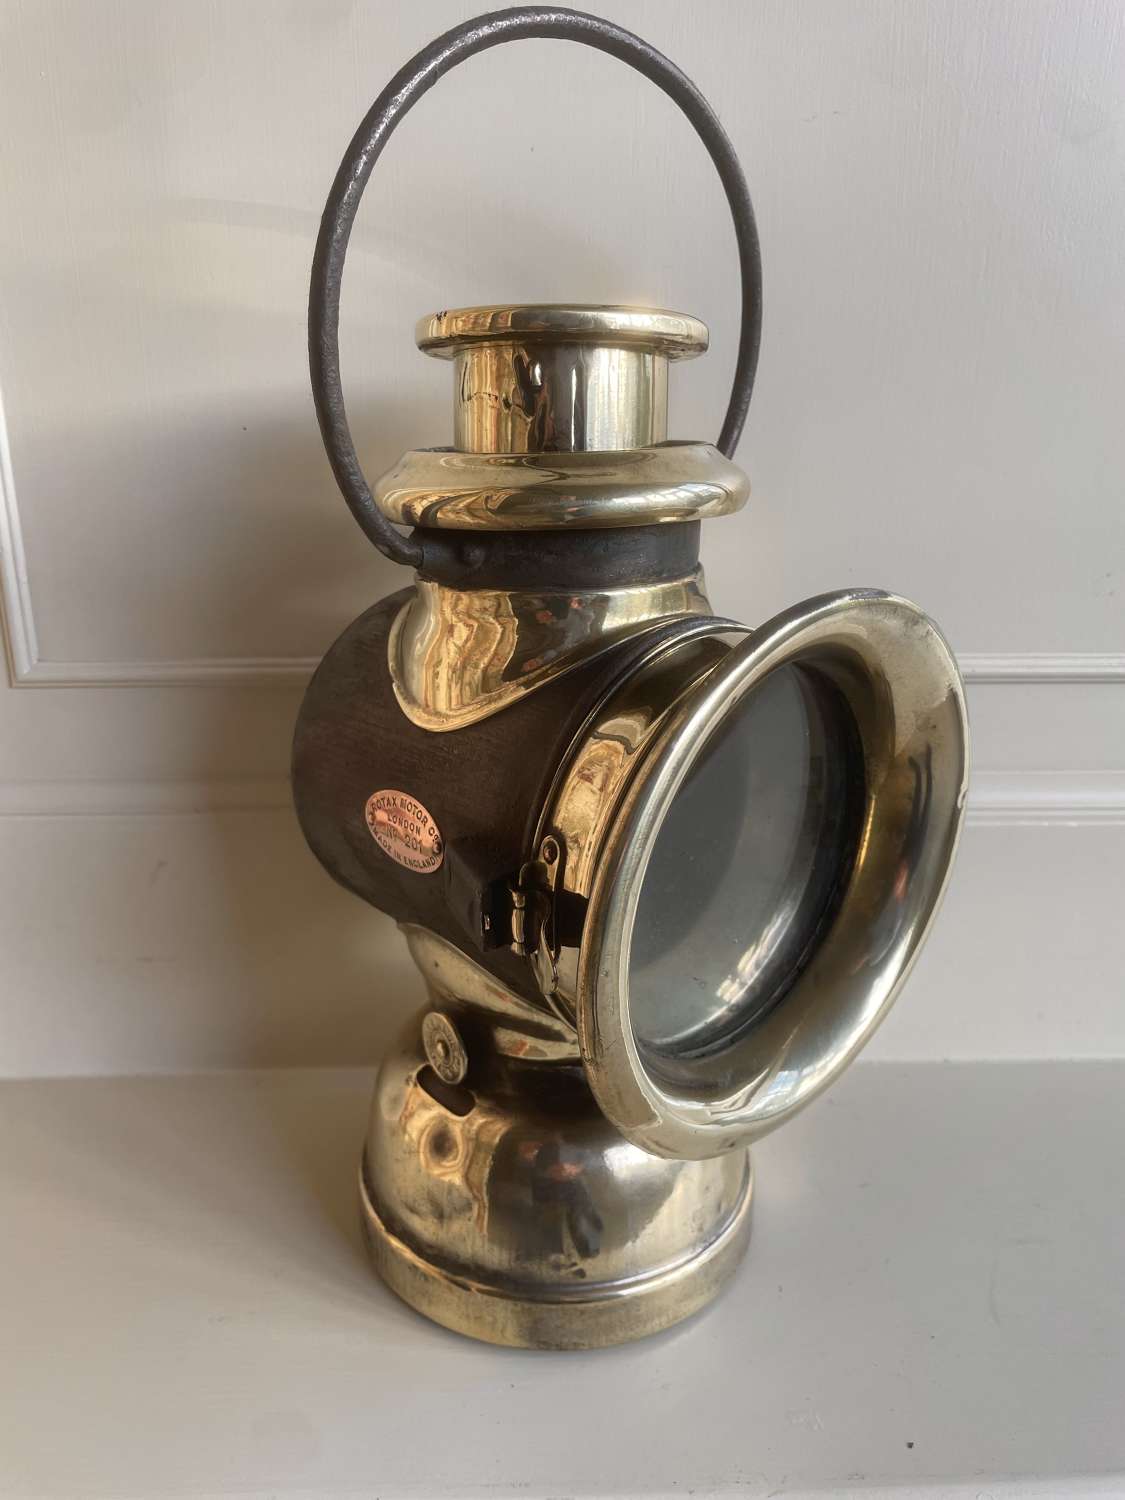 Fine, early vintage Rotax Car Lamp